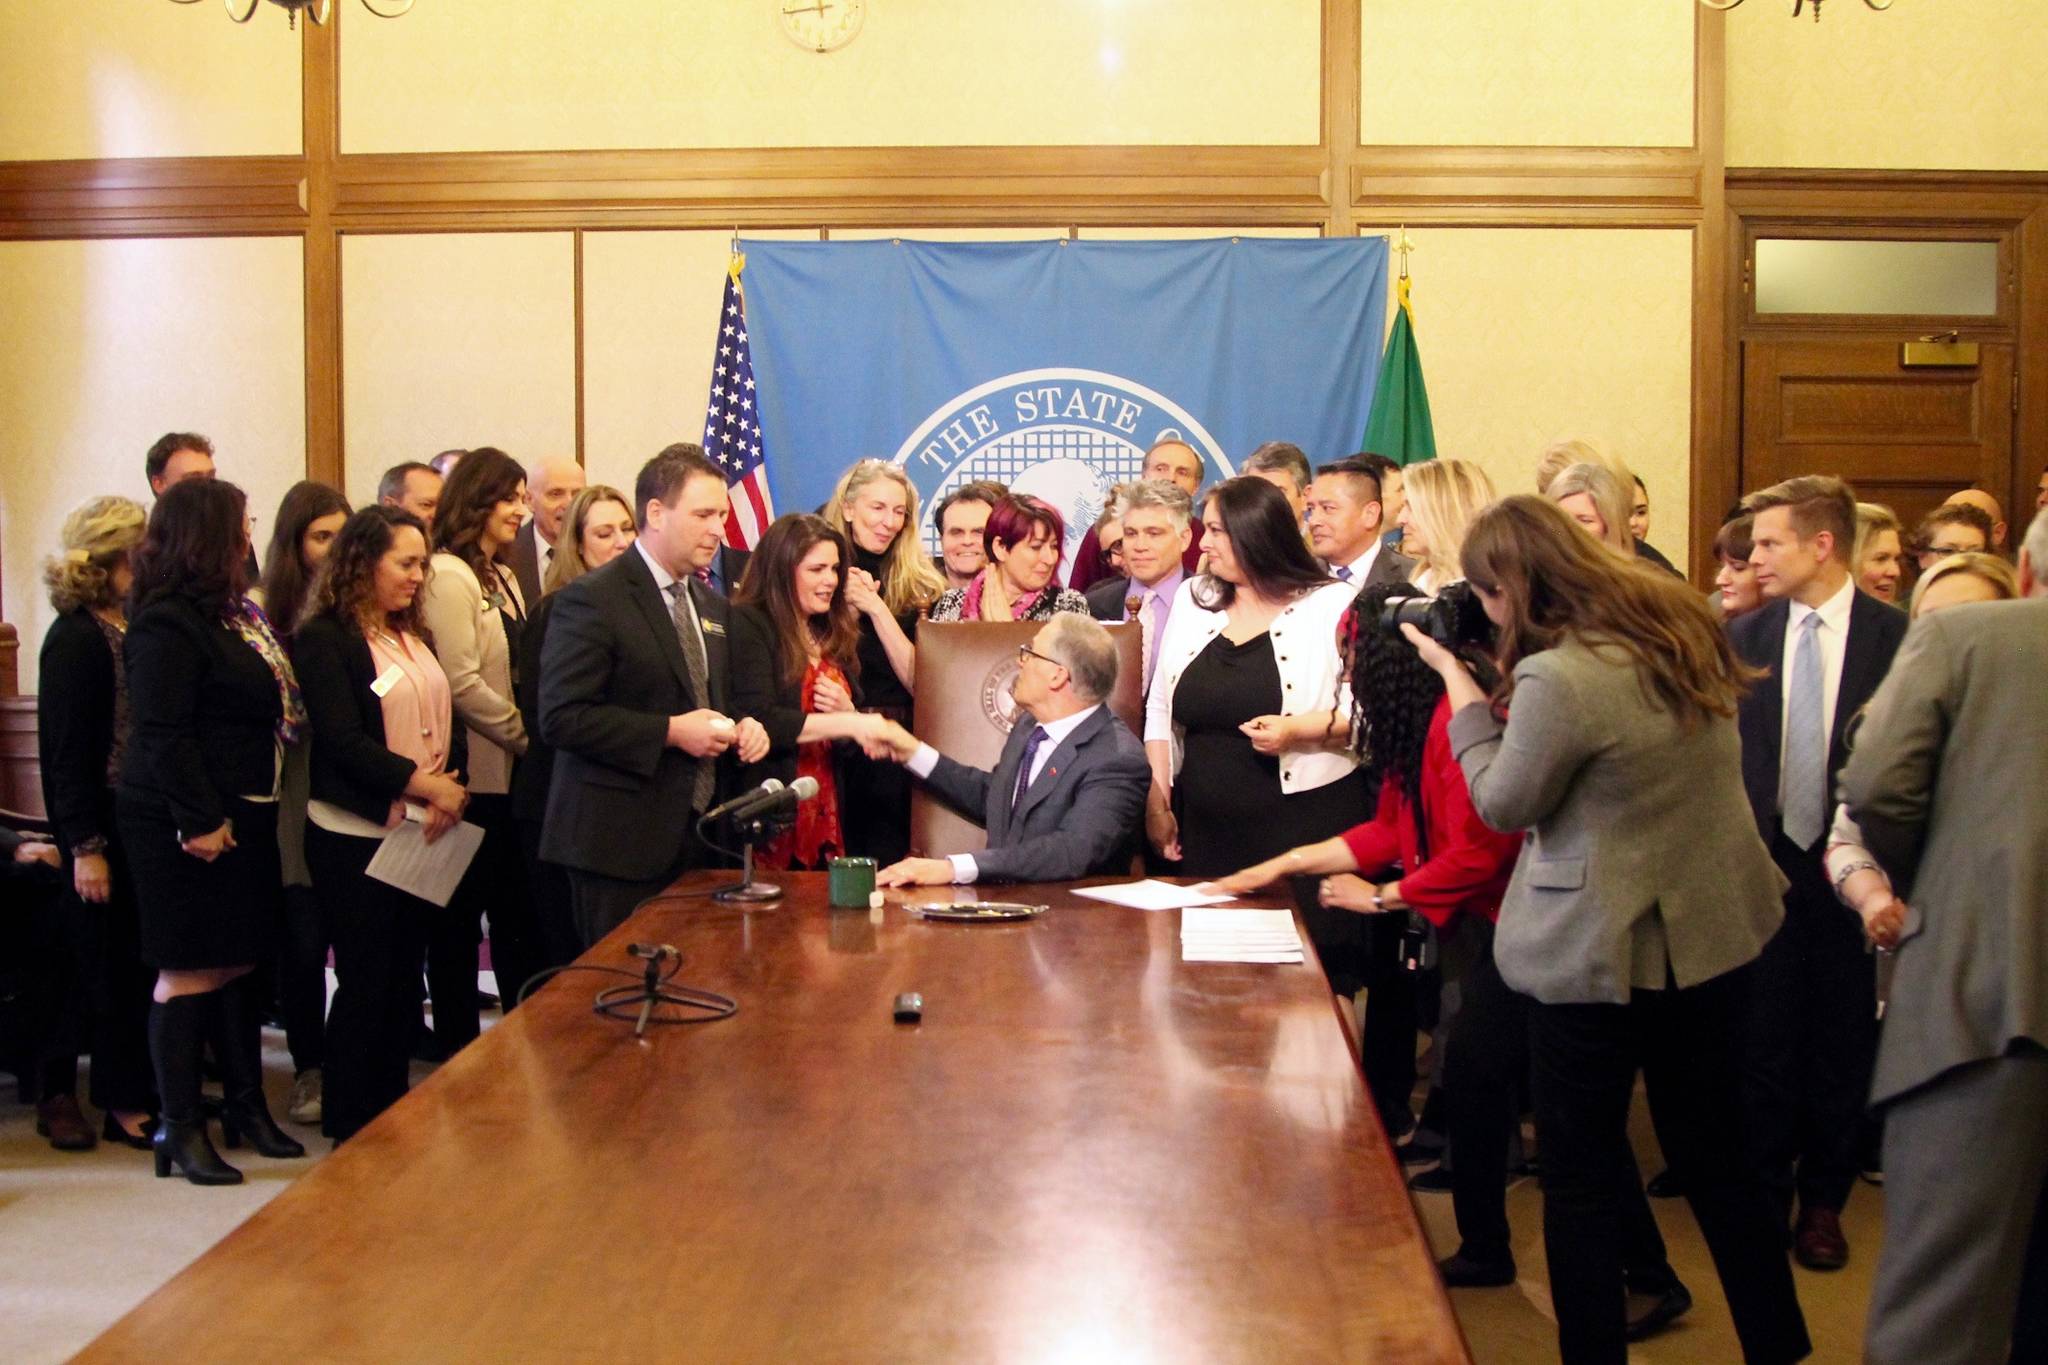 Gov. Jay Inslee shakes hands with Dinah Griffey after signing Senate Bill 5649. Inslee mentioned both Rep. Dan Griffey and his wife Dinah Griffey in his remarks on the bill. Photo by Emma Epperly, <em>WNPA Olympia News Bureau</em>